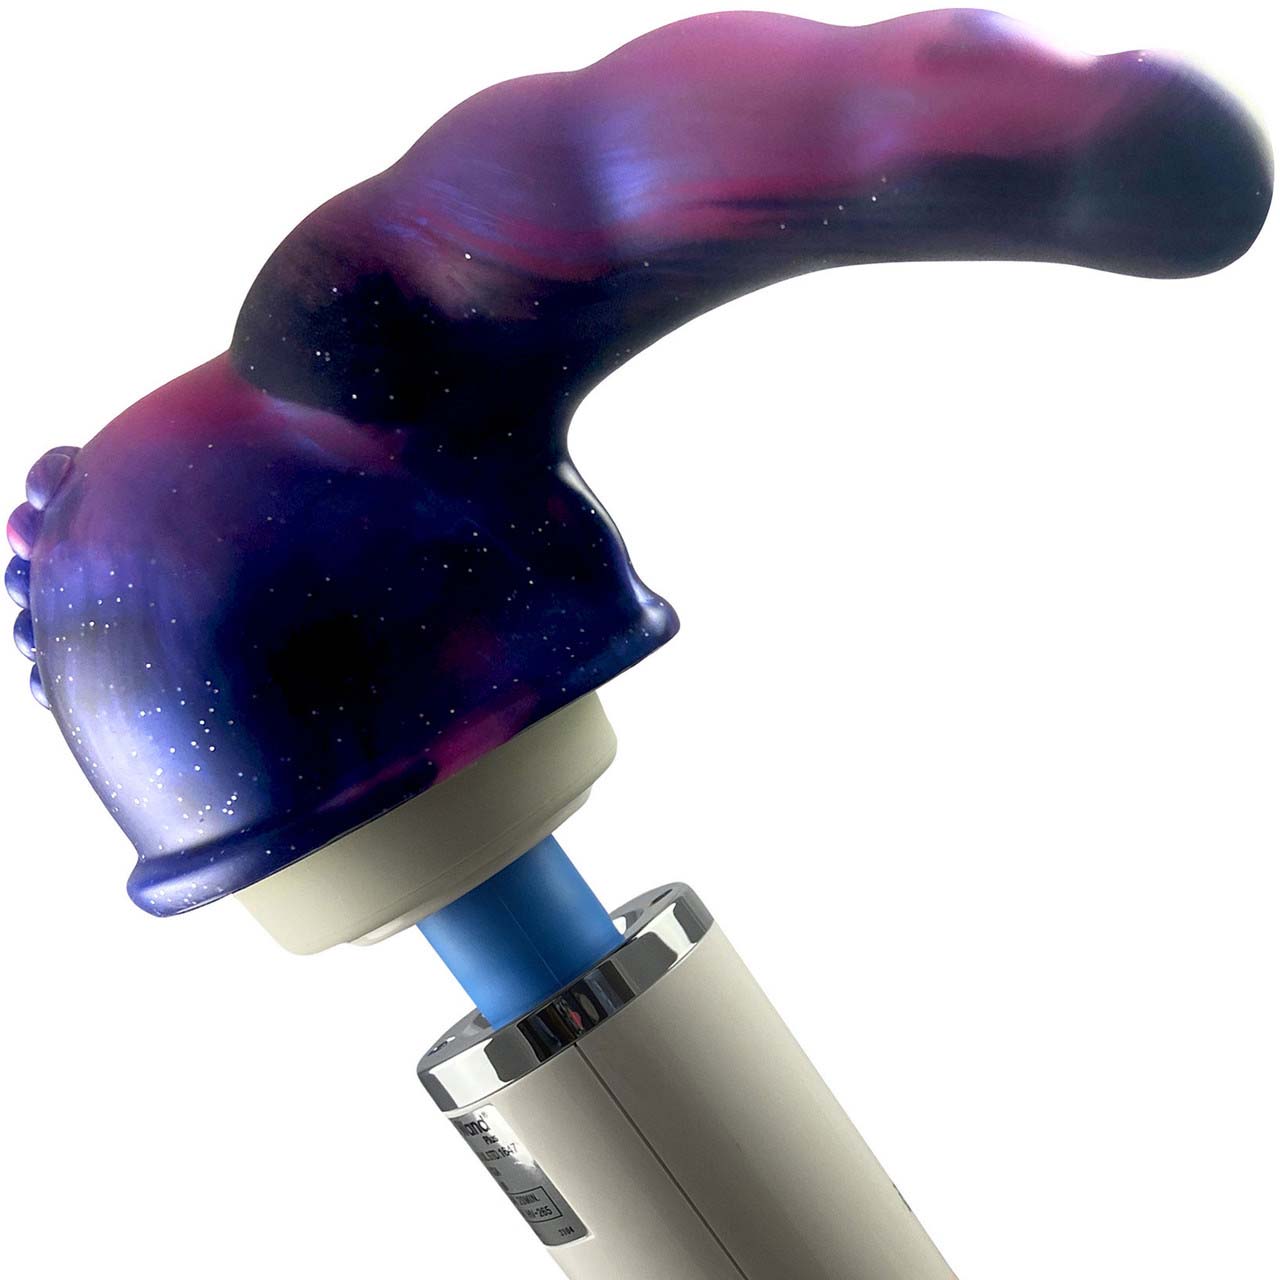 The Galaxy Gee Whizzard Magic Wand Vibrator Attachment on the head of a magic wand.